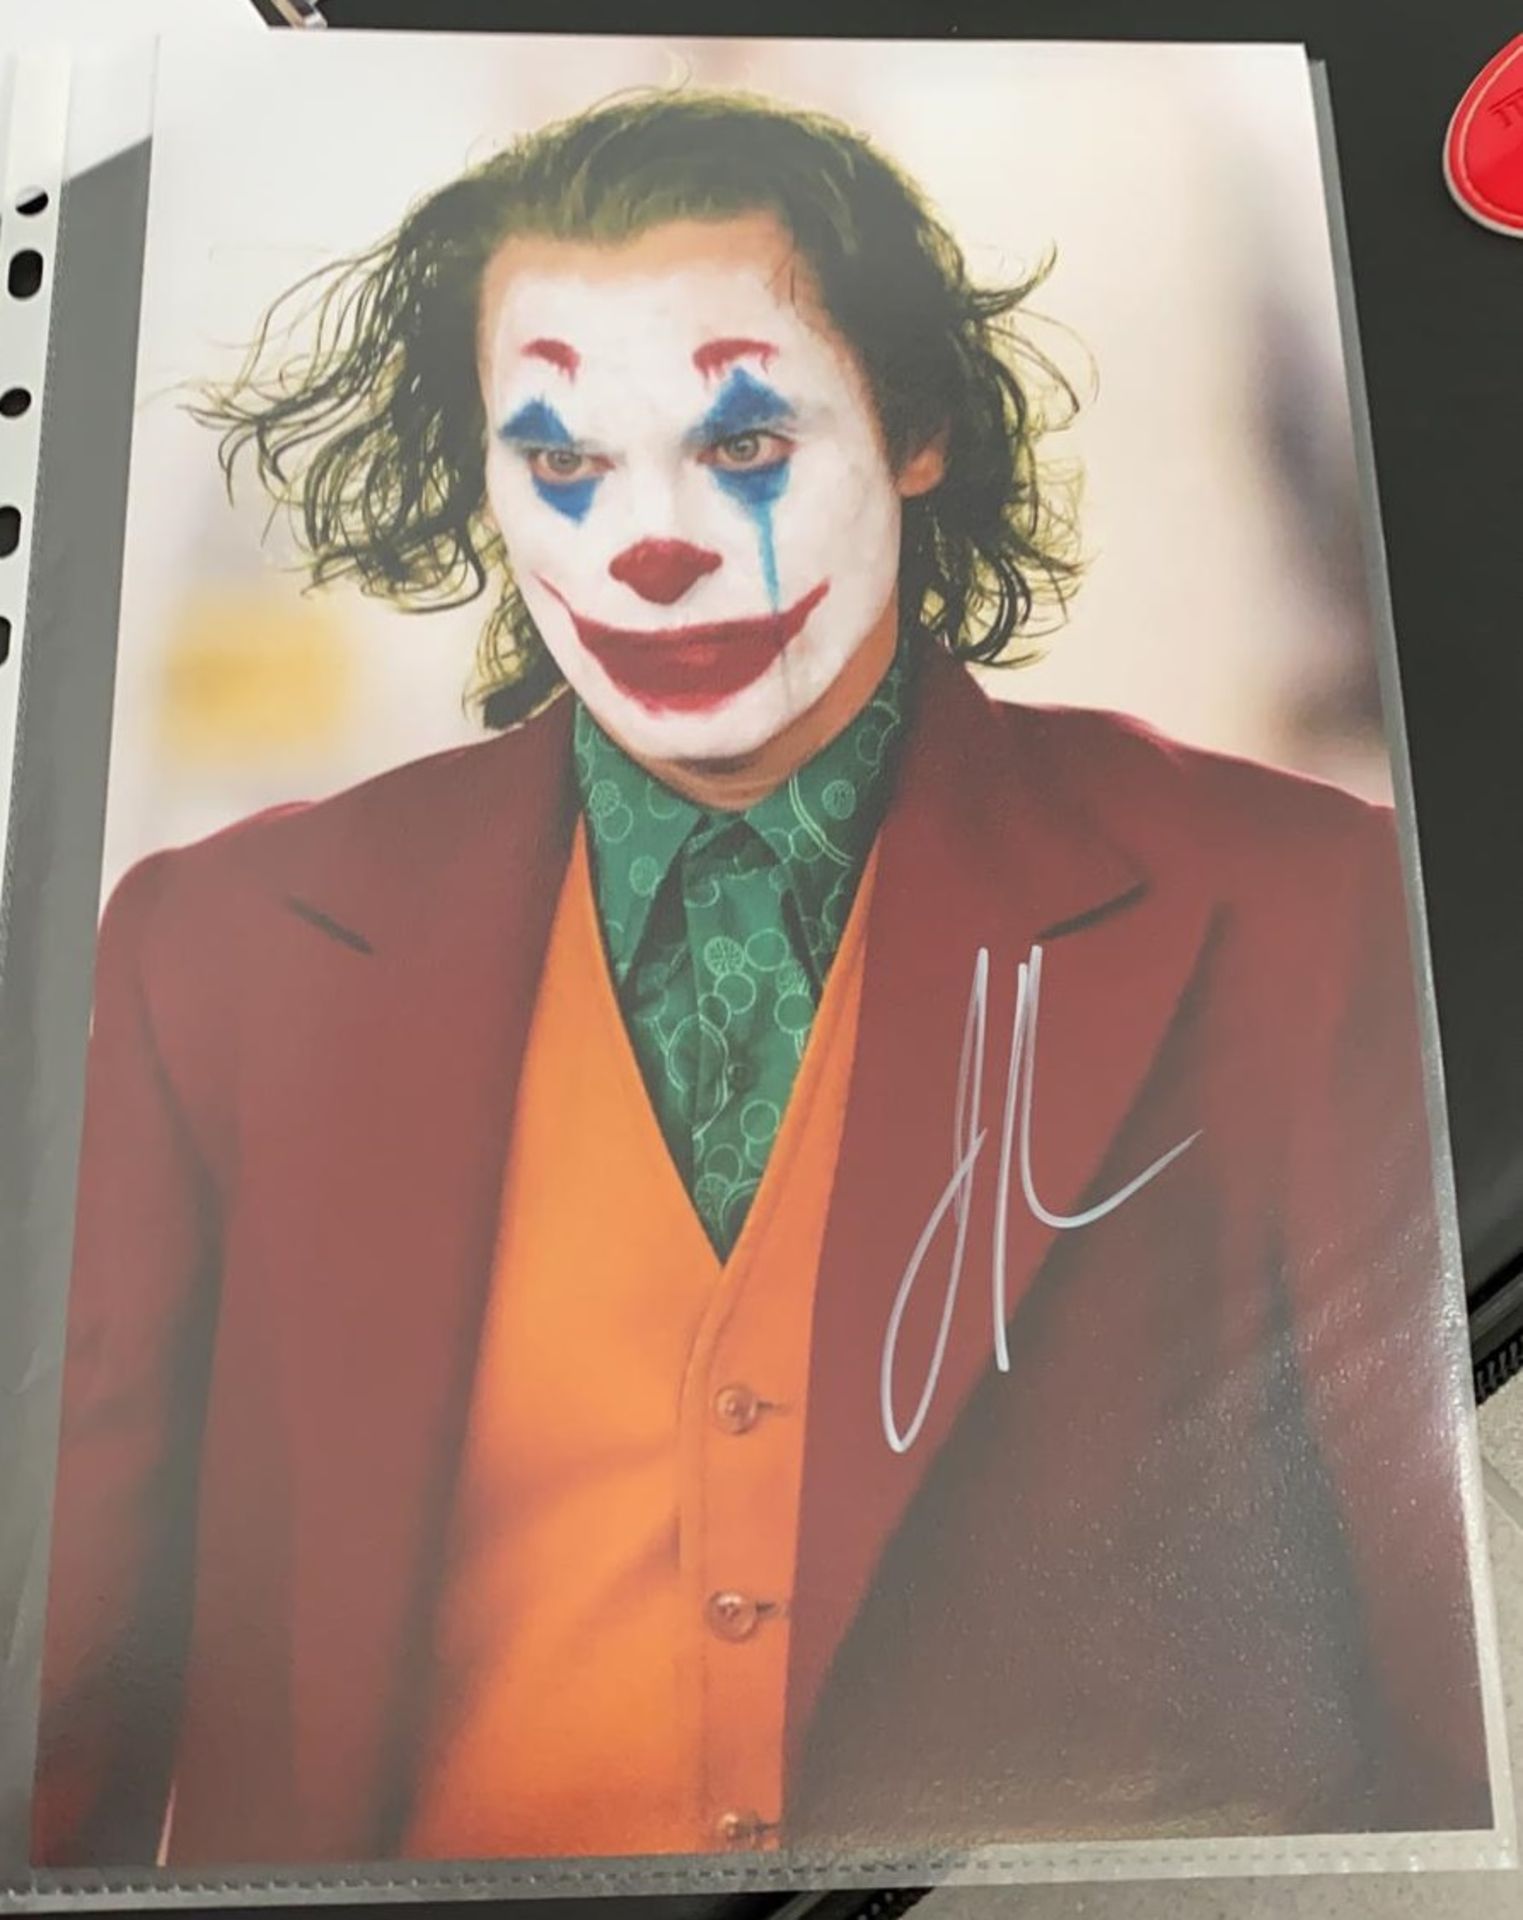 1 x Signed Autograph Picture - JOAQUIN PHOENIX THE JOKER - With COA - Size 12 x 8 Inch - CL590 - - Image 2 of 3